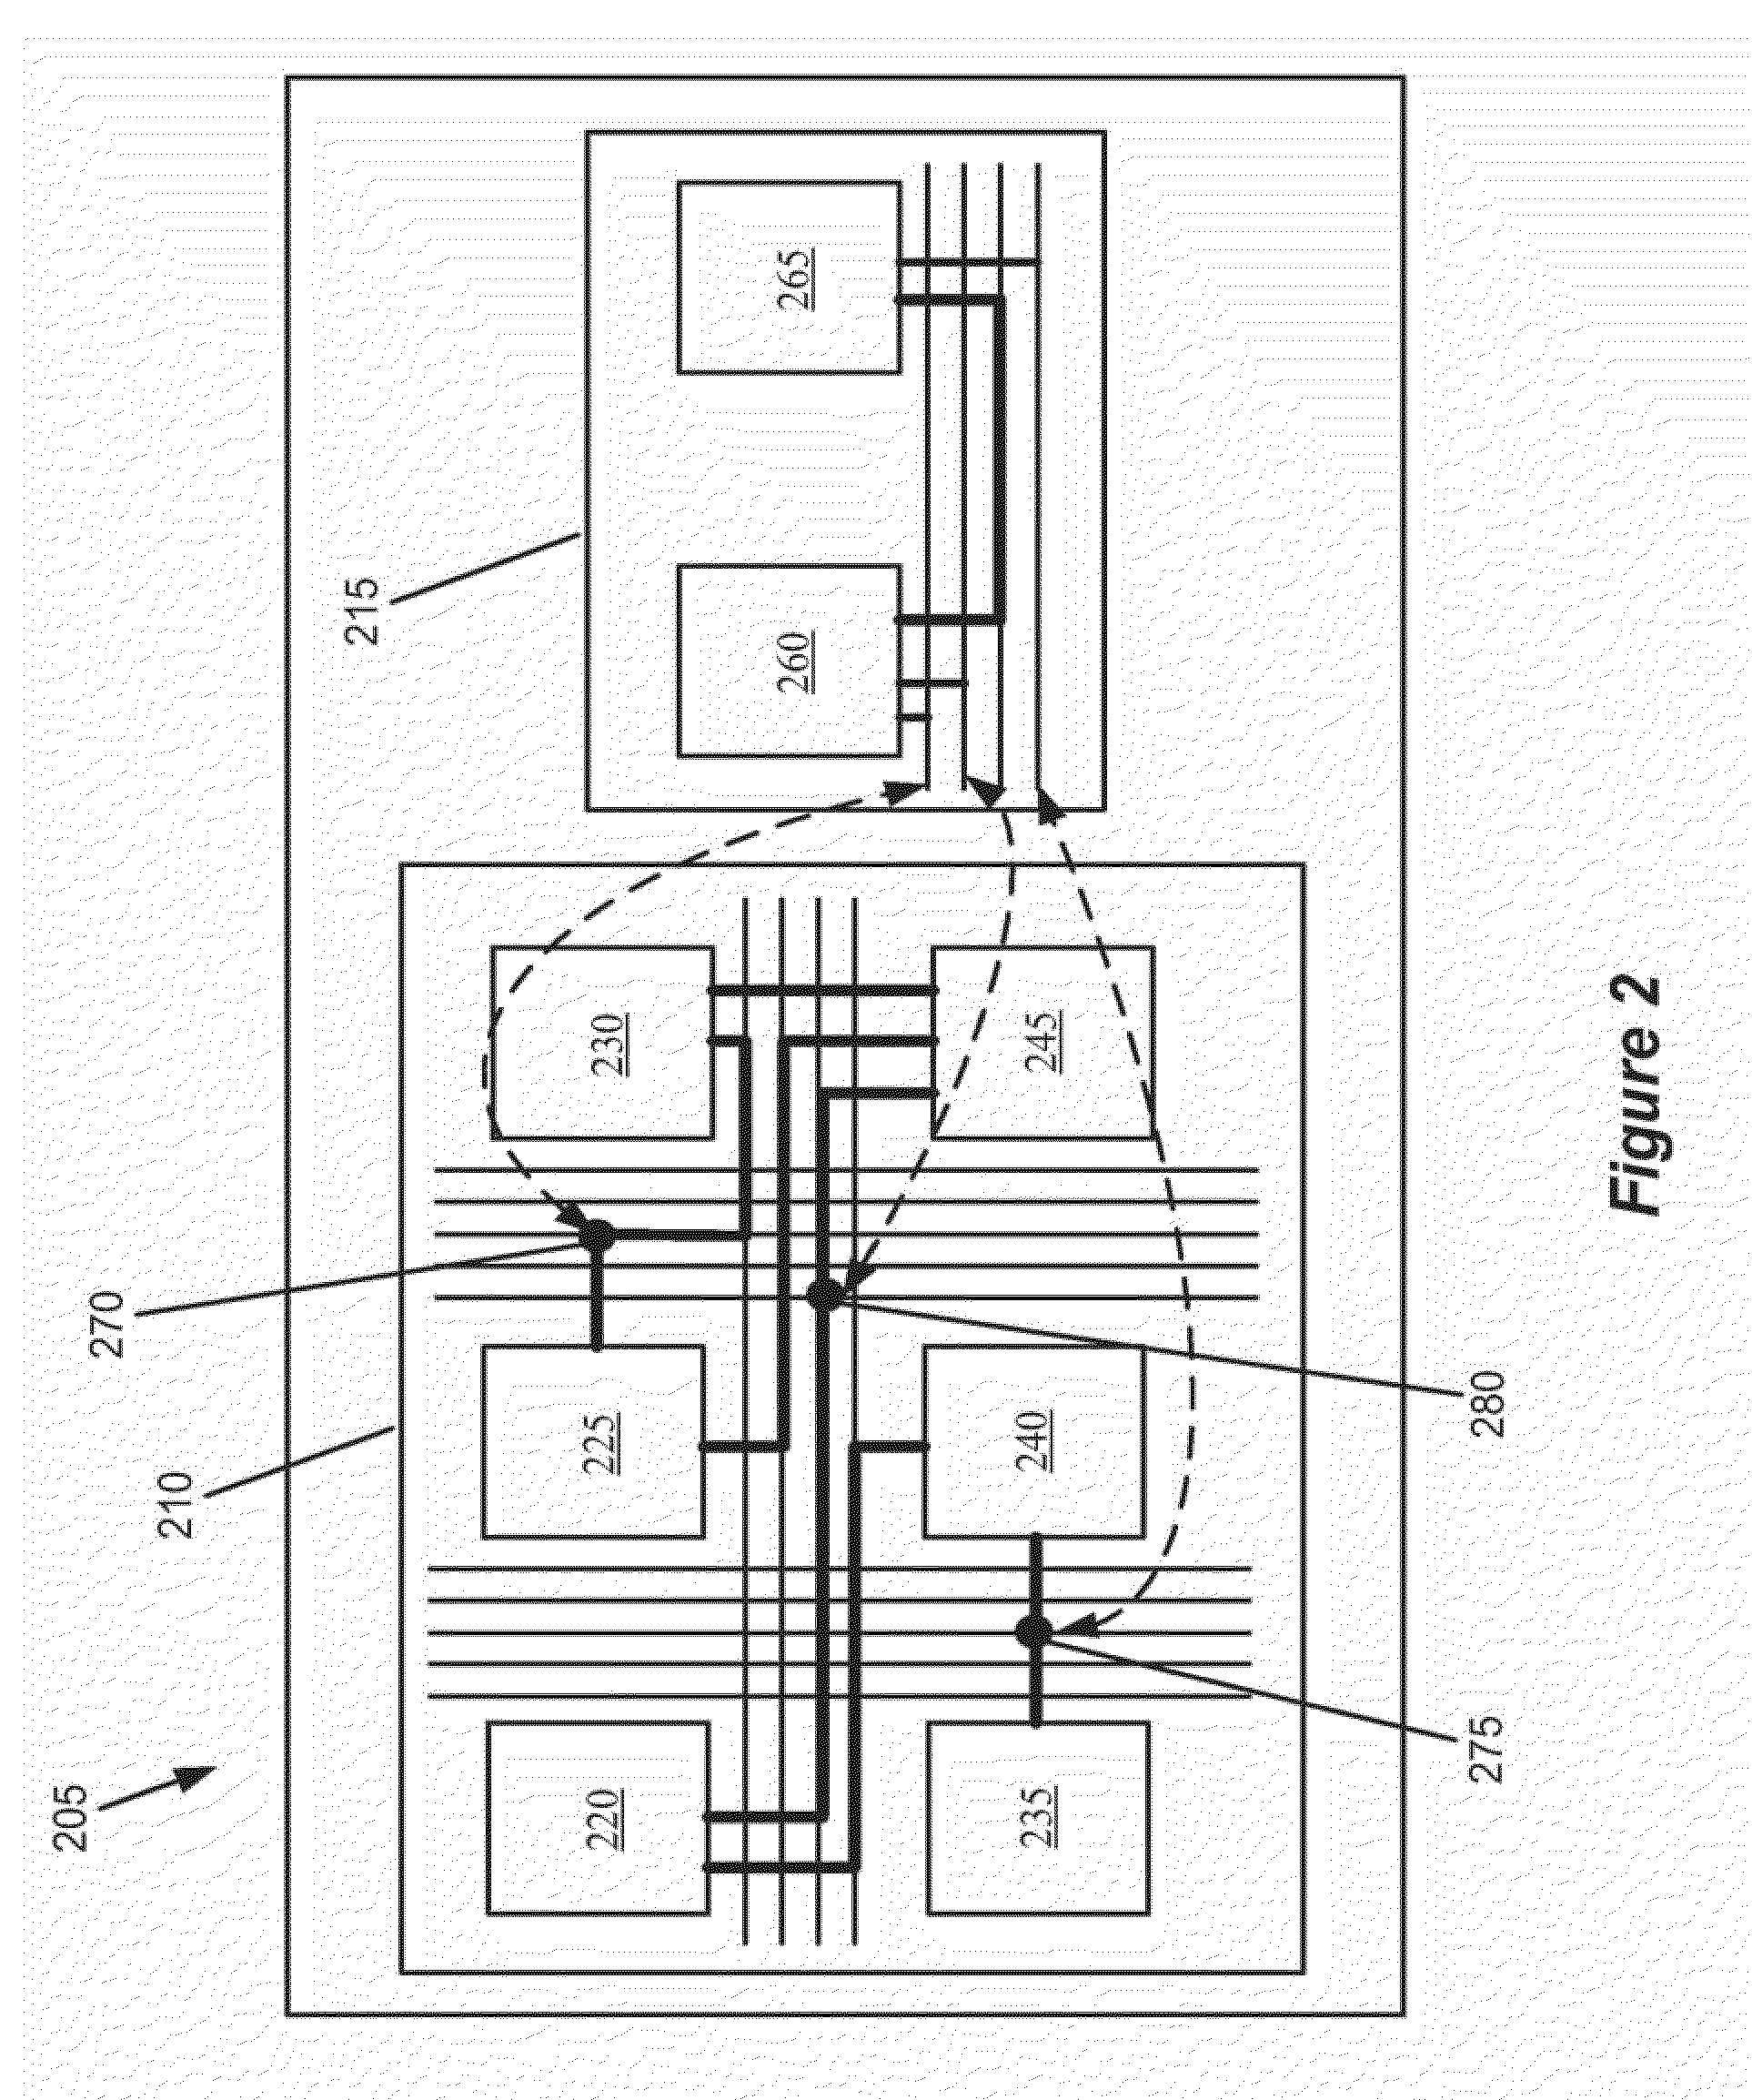 Intergrated circuit (IC) with primary and secondary networks and device containing such IC